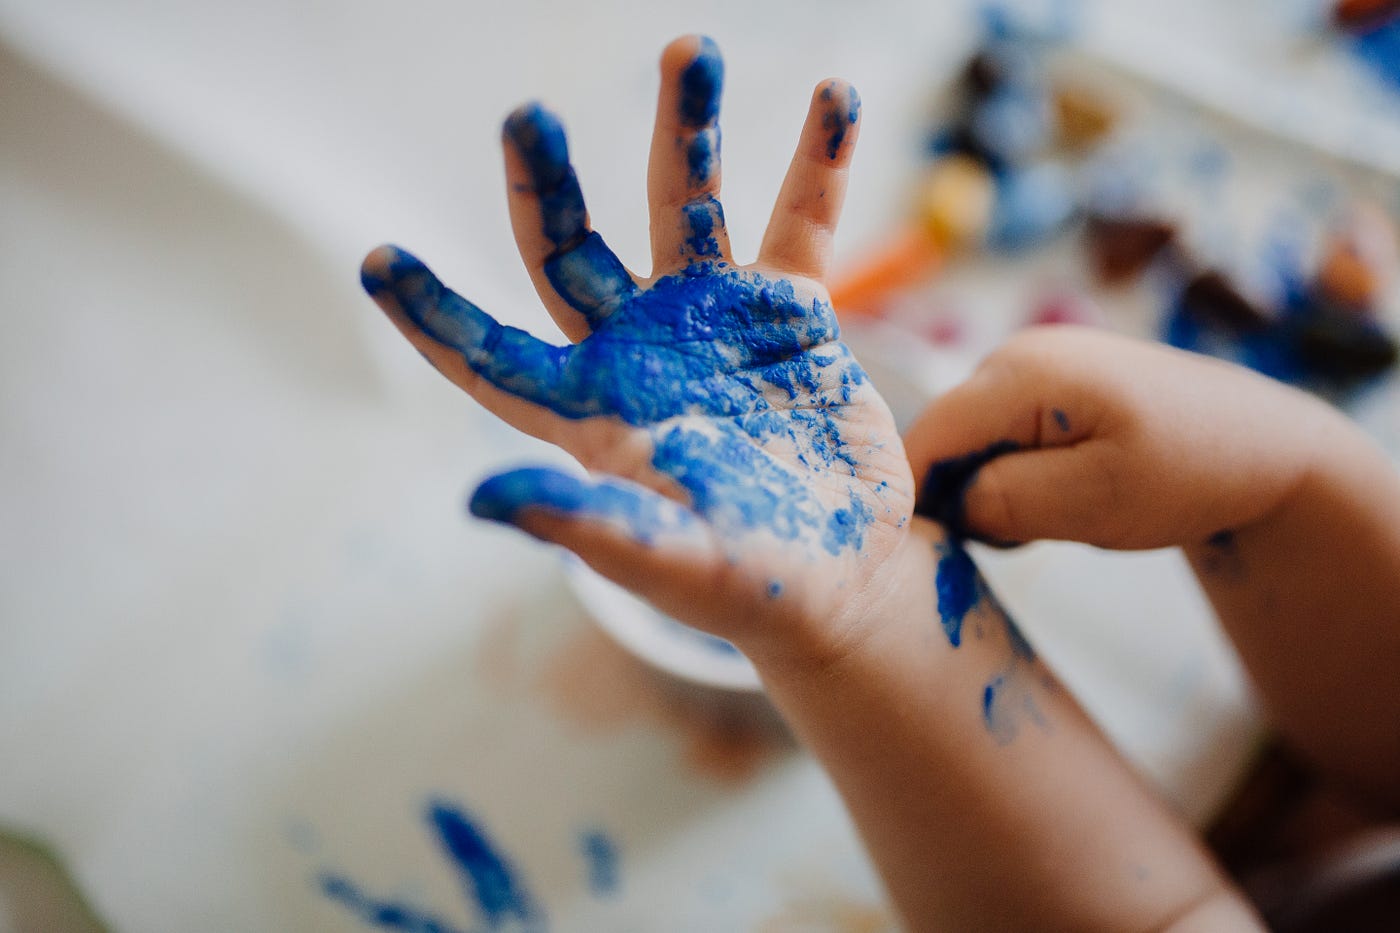 A child’s hand (covered with fresh blue paint) emerges from the lower right corner. Trichloroethylene (TCE) can be found in some paint remover.